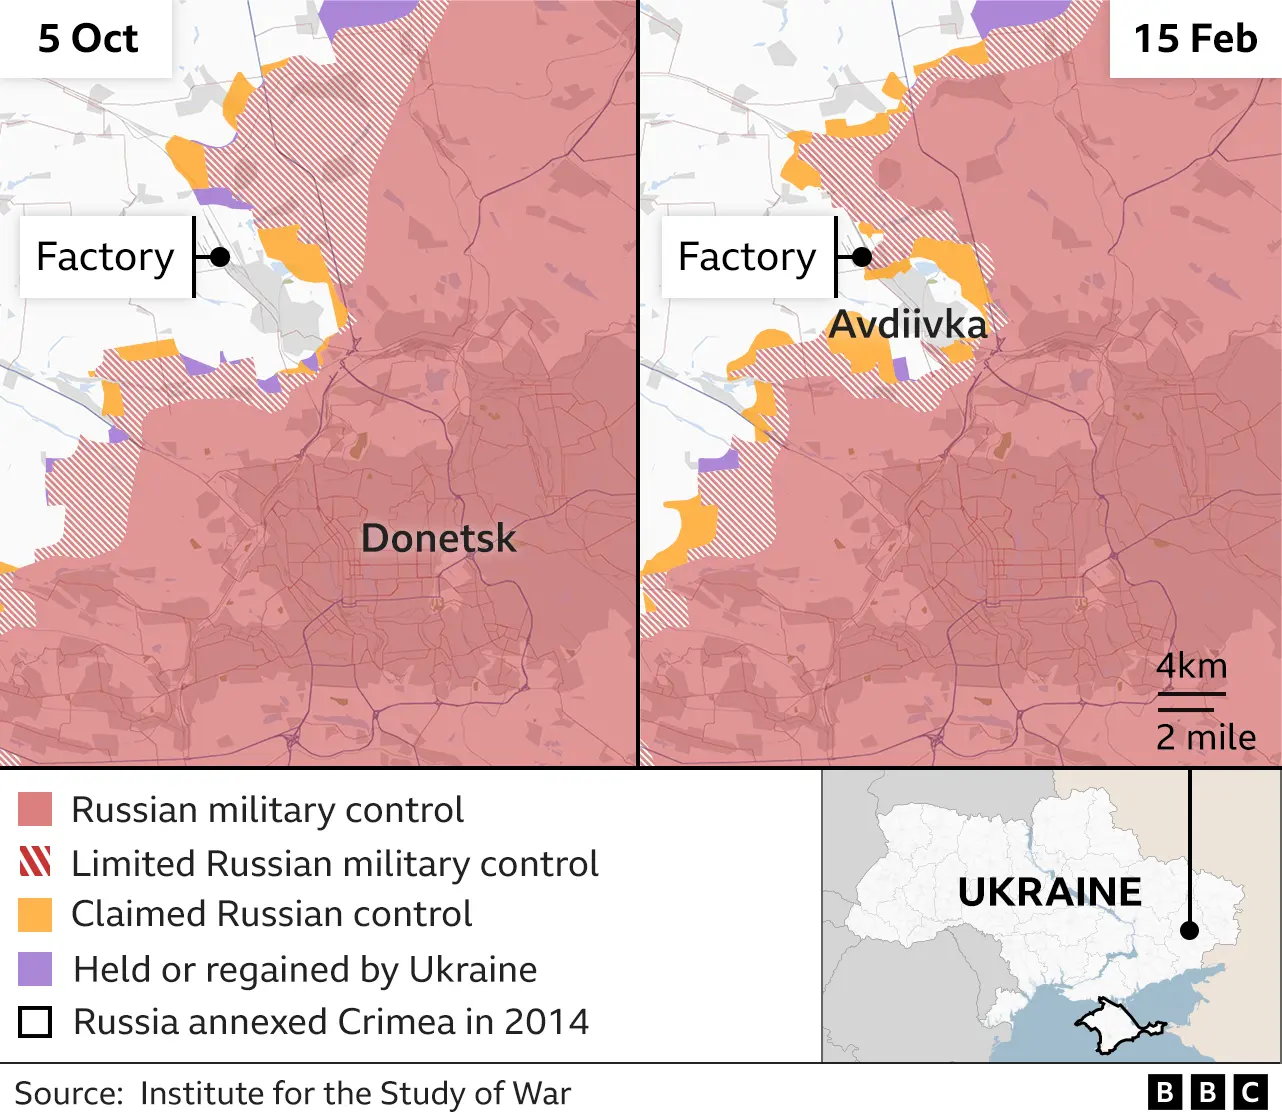 132678903 before and after avdiivka coke factory 150224 640 nc.png